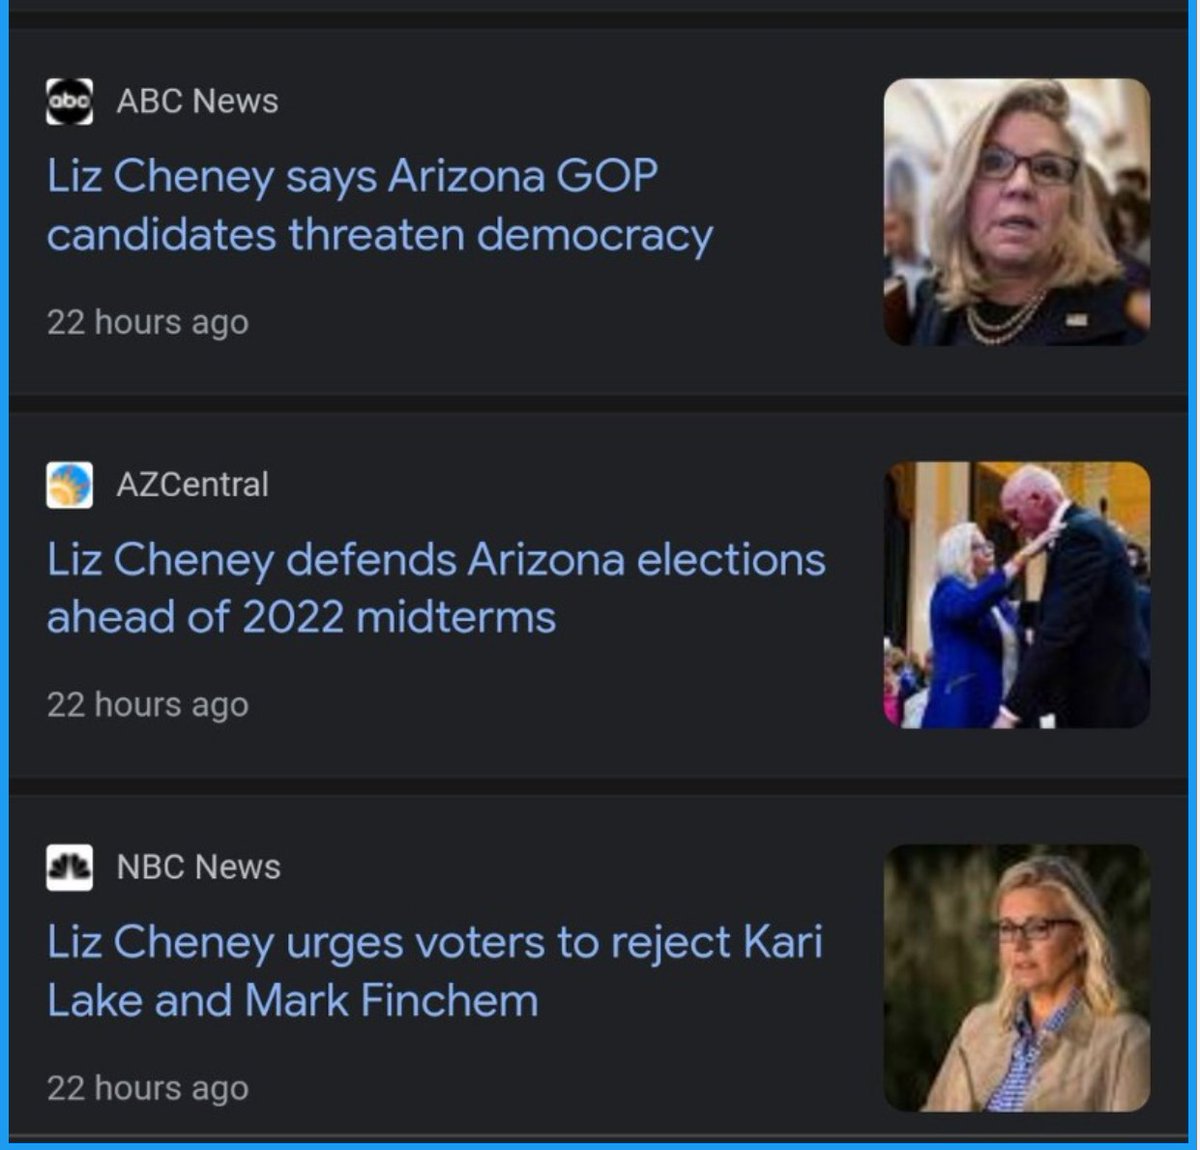 Liz Cheney says Arizona GOP candidates threaten democracy. She urges voters to reject Republican election deniers Kari Lake & Mark Finchem. VOTE for: - @katiehobbs for Governor - @CaptMarkKelly for Senate - @krismayes for Attorney General - @Adrian_Fontes for Secretary of State